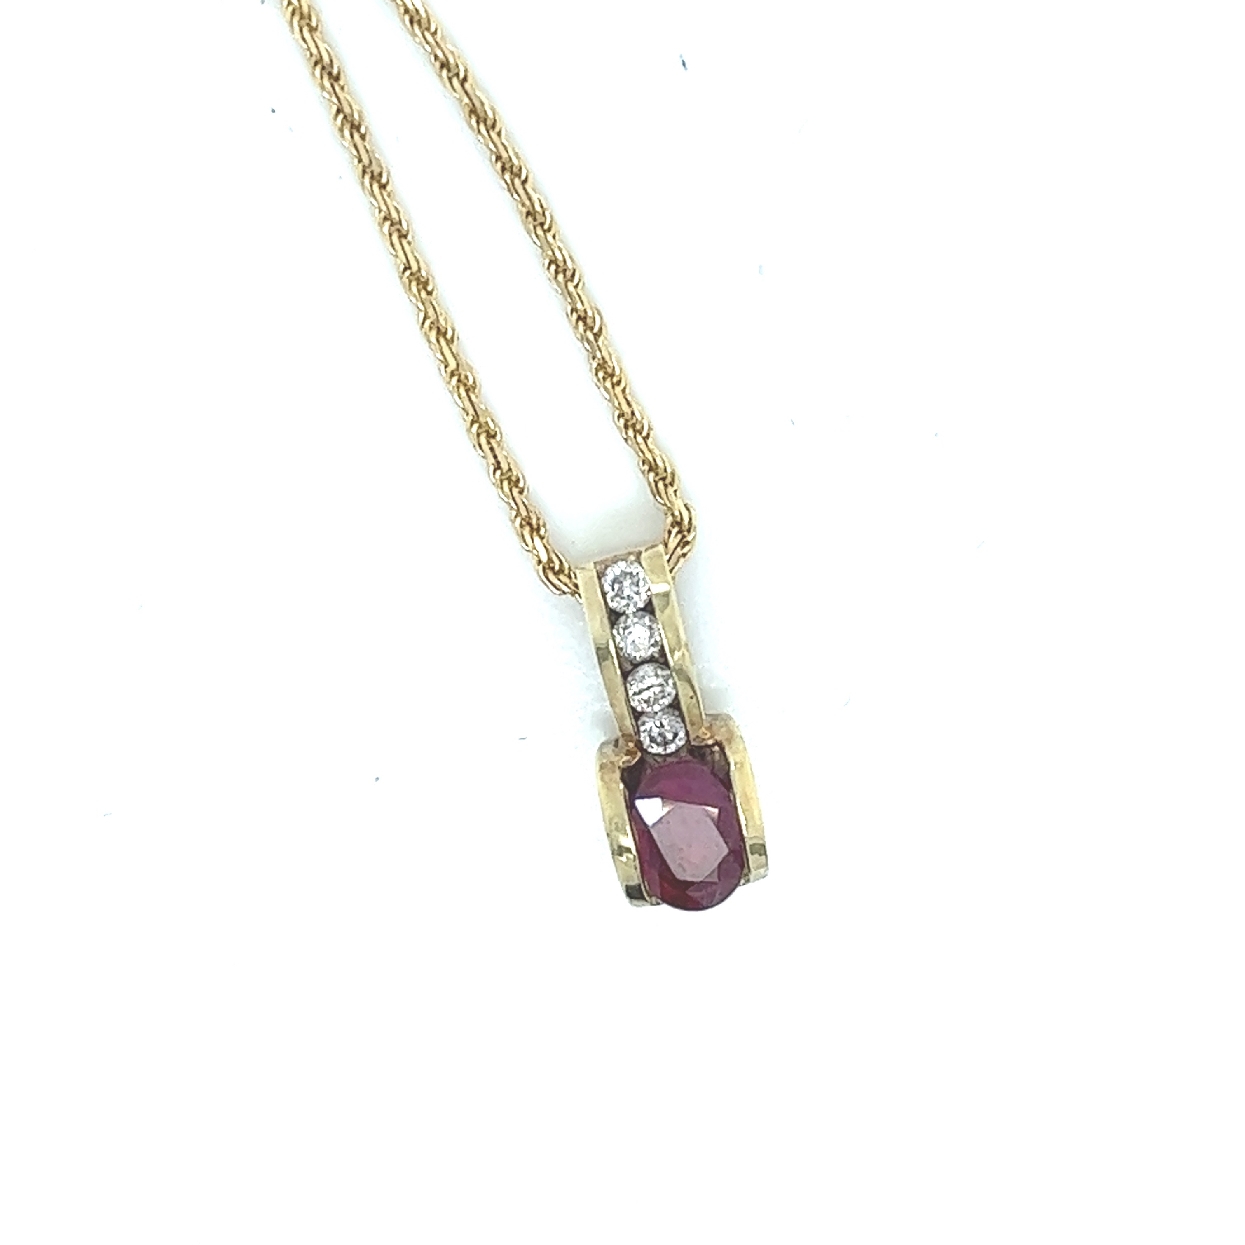 14K Yellow Gold Rope Necklace with Oval Ruby Pendant and Diamond Accents

2.1ct 7x5mm Oval Ruby
4 Round Brillant Cut Diamonds .06cttw SI/I 
18 Inches Total Length 